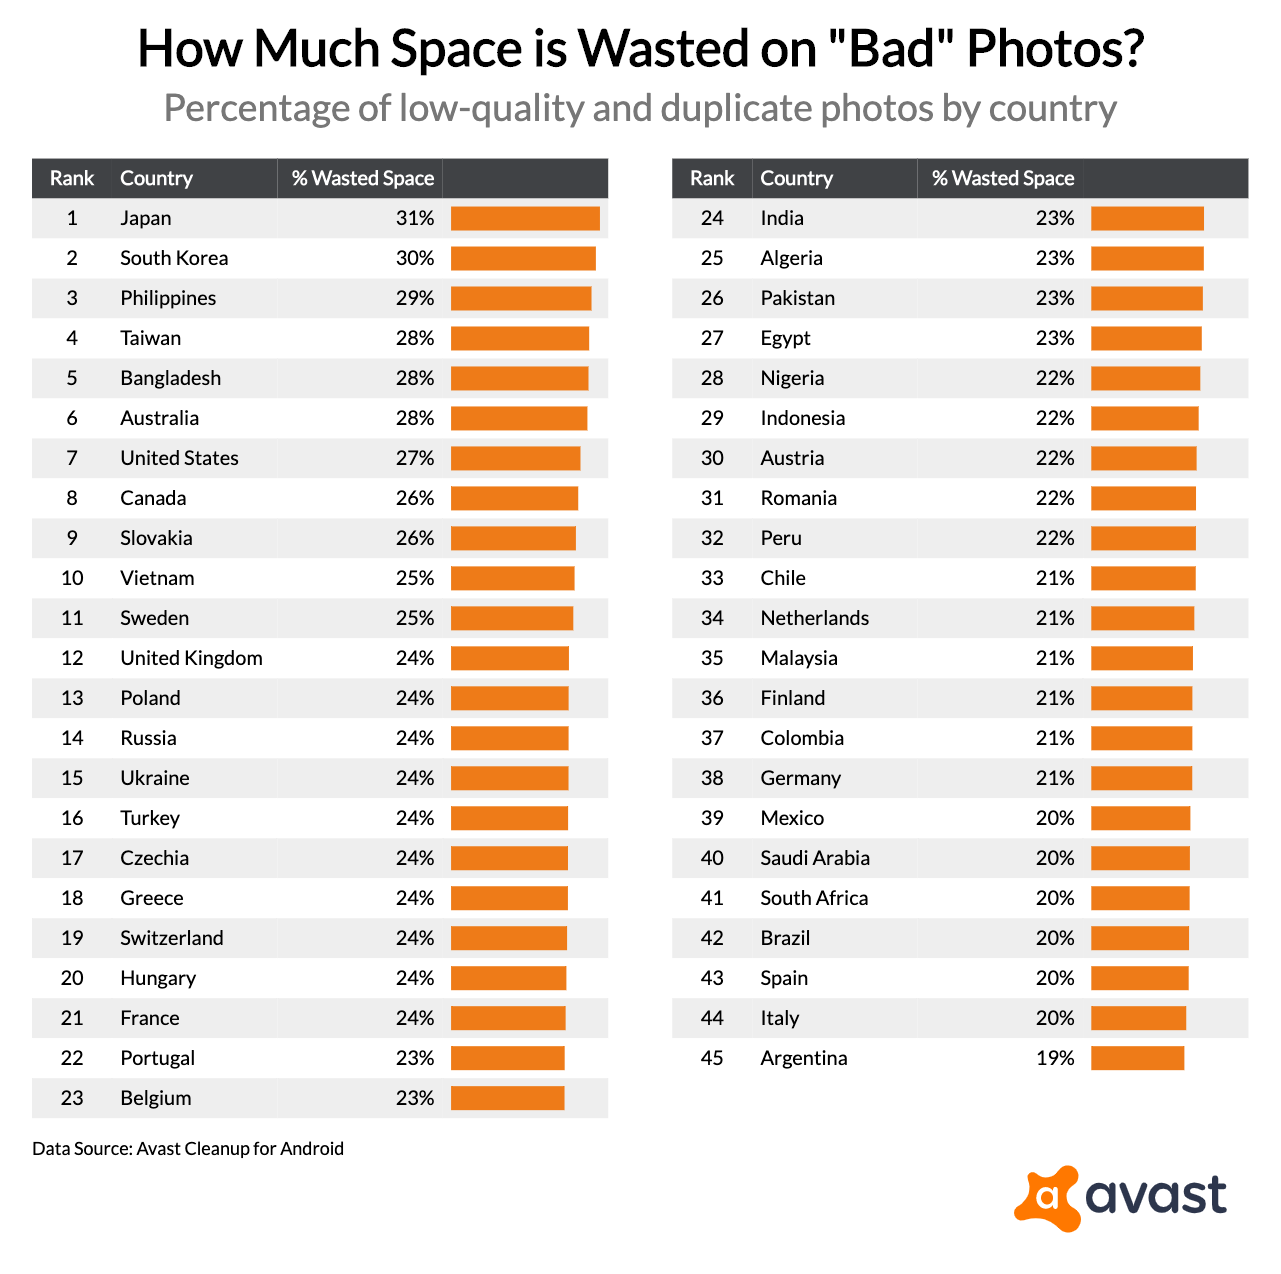 how-much-space-is-wasted-on-bad-photos_2019-09-26T21_18_28.617Z